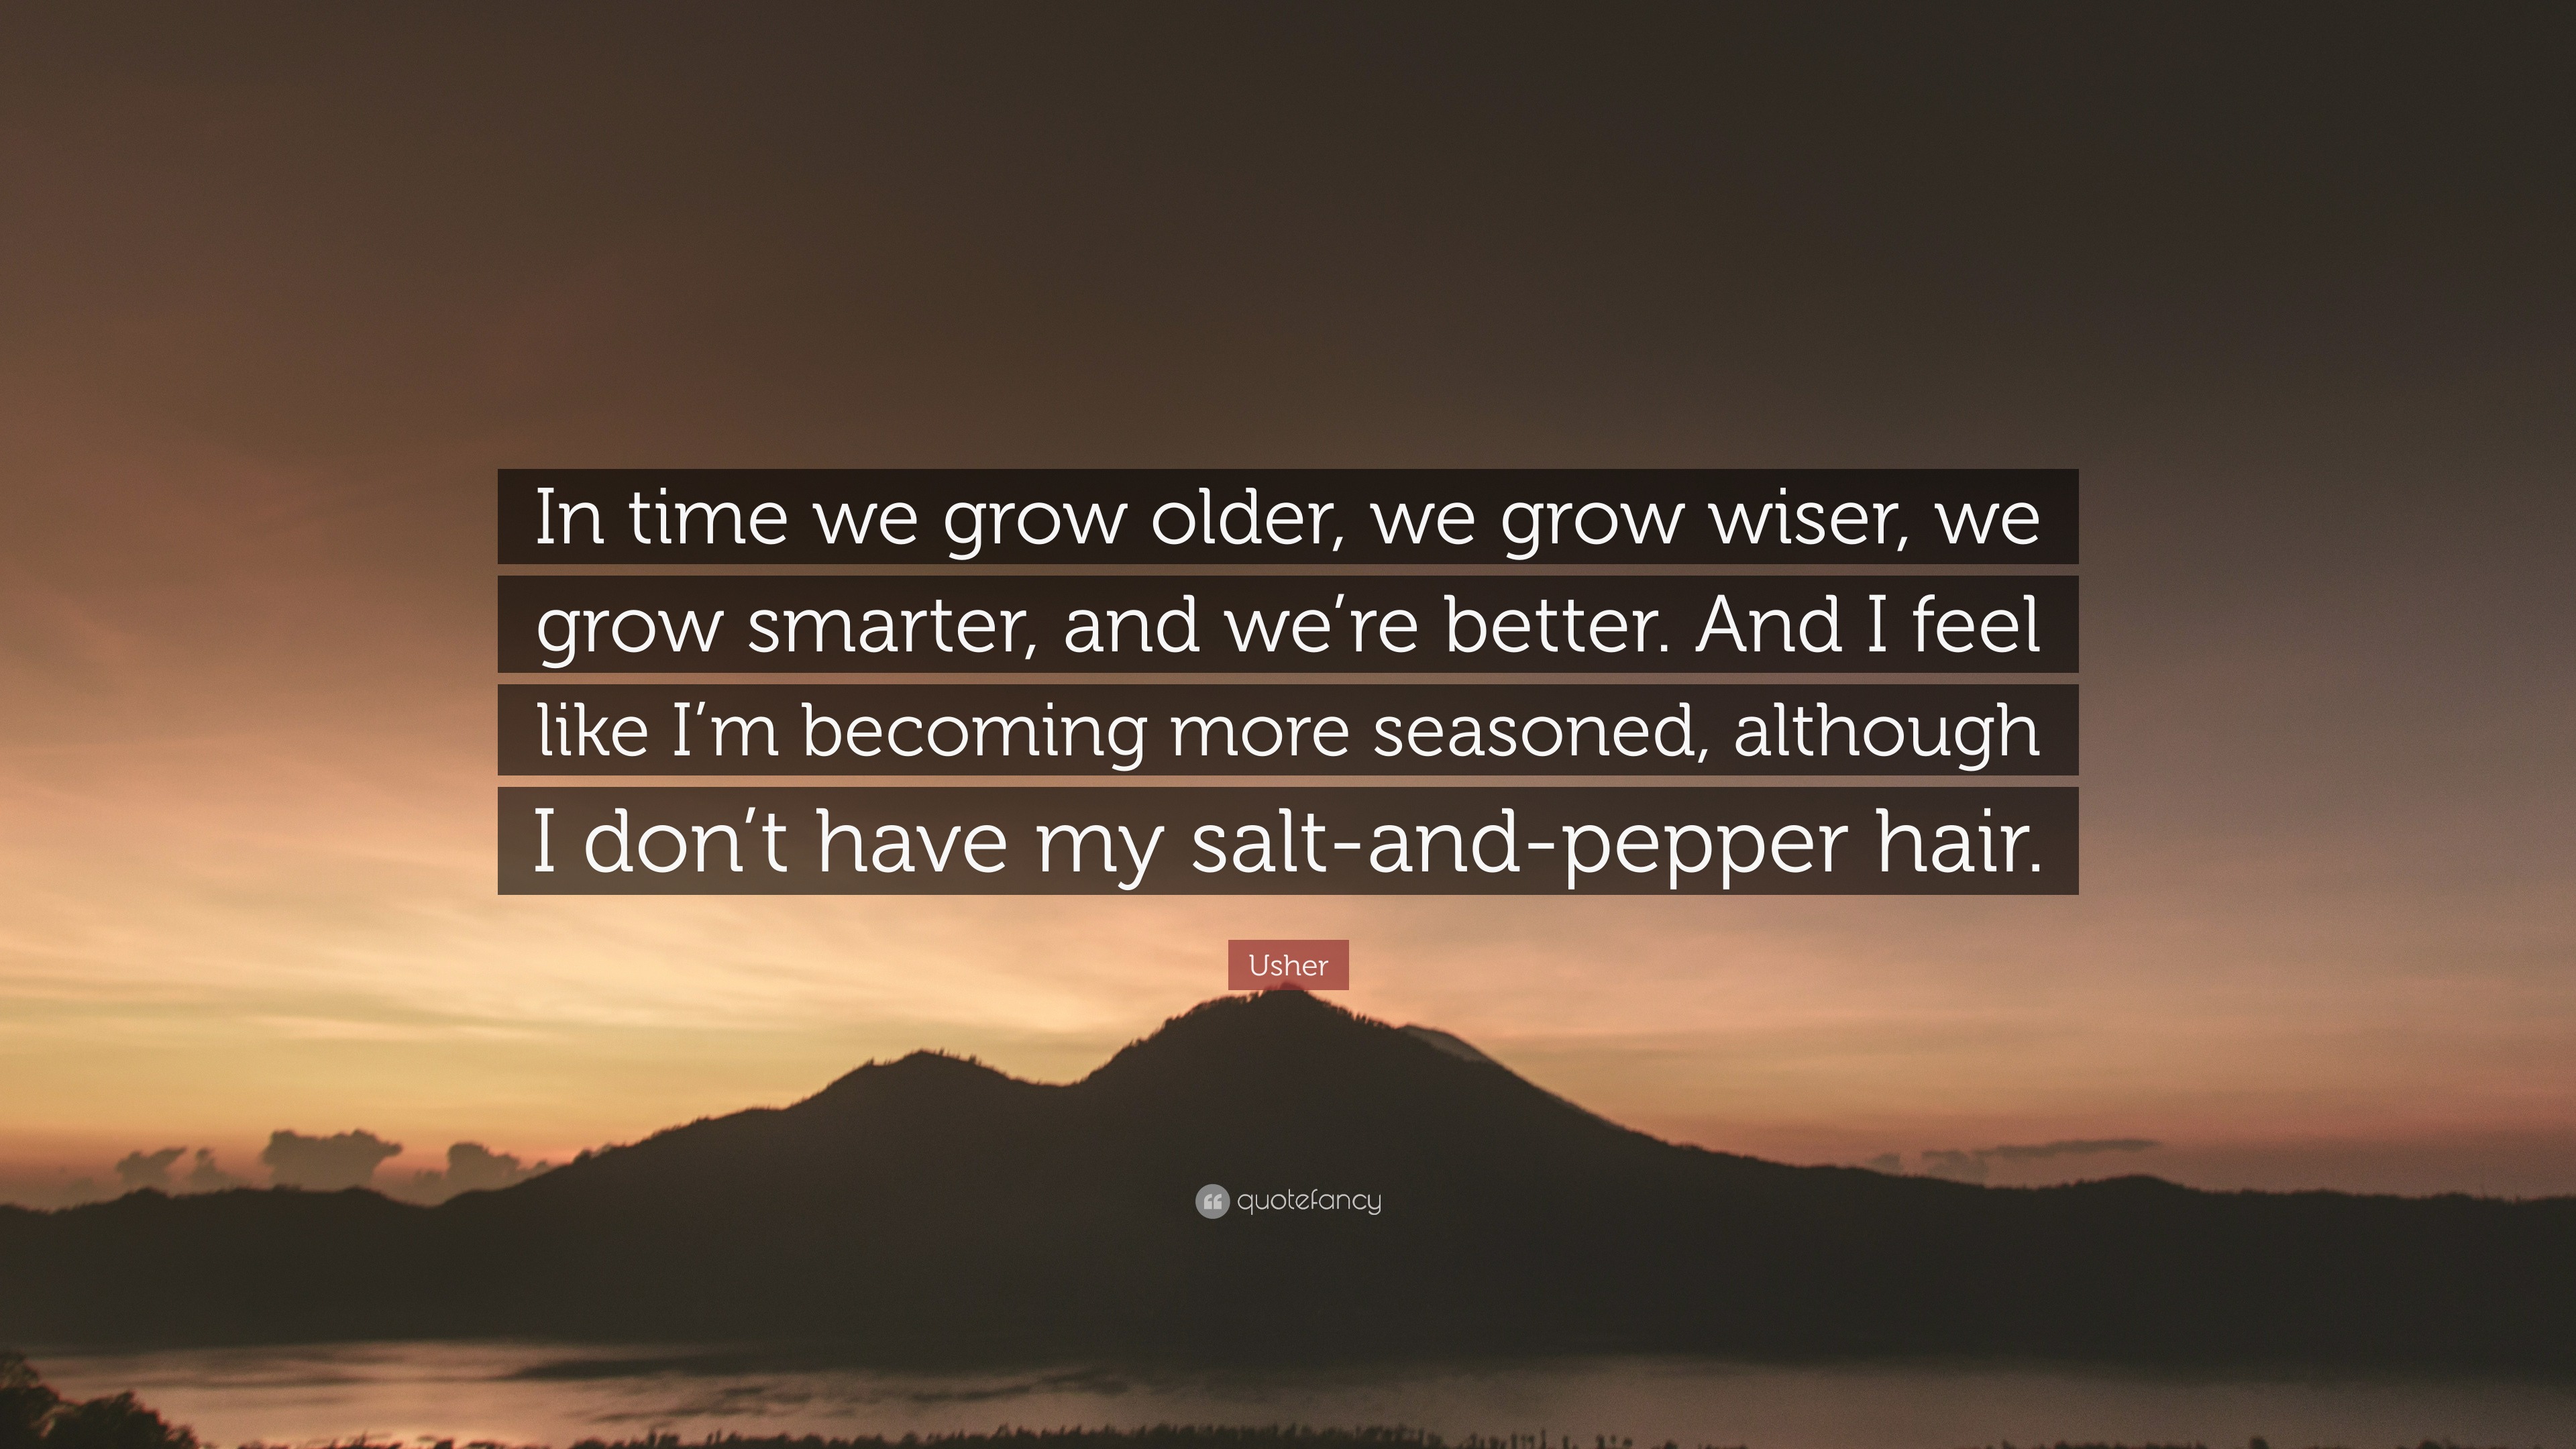 Usher Quote: “In time we grow older, we grow wiser, we grow smarter, and  we're better. And I feel like I'm becoming more seasoned, alt...”